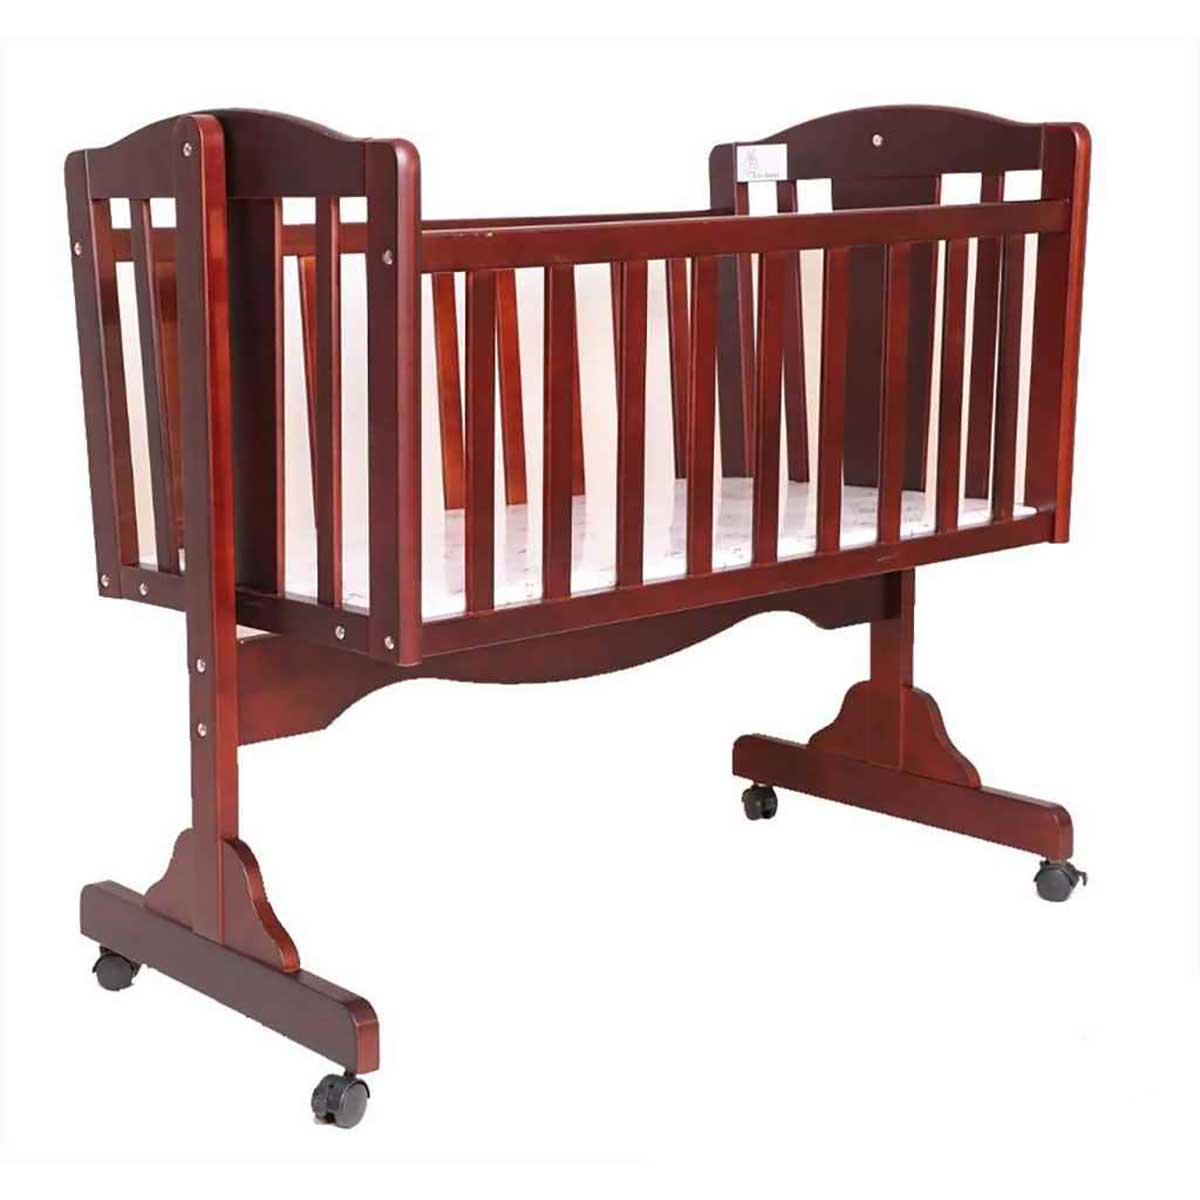 R FOR RABBIT Dream Time Wooden Cradle for New Born Babies